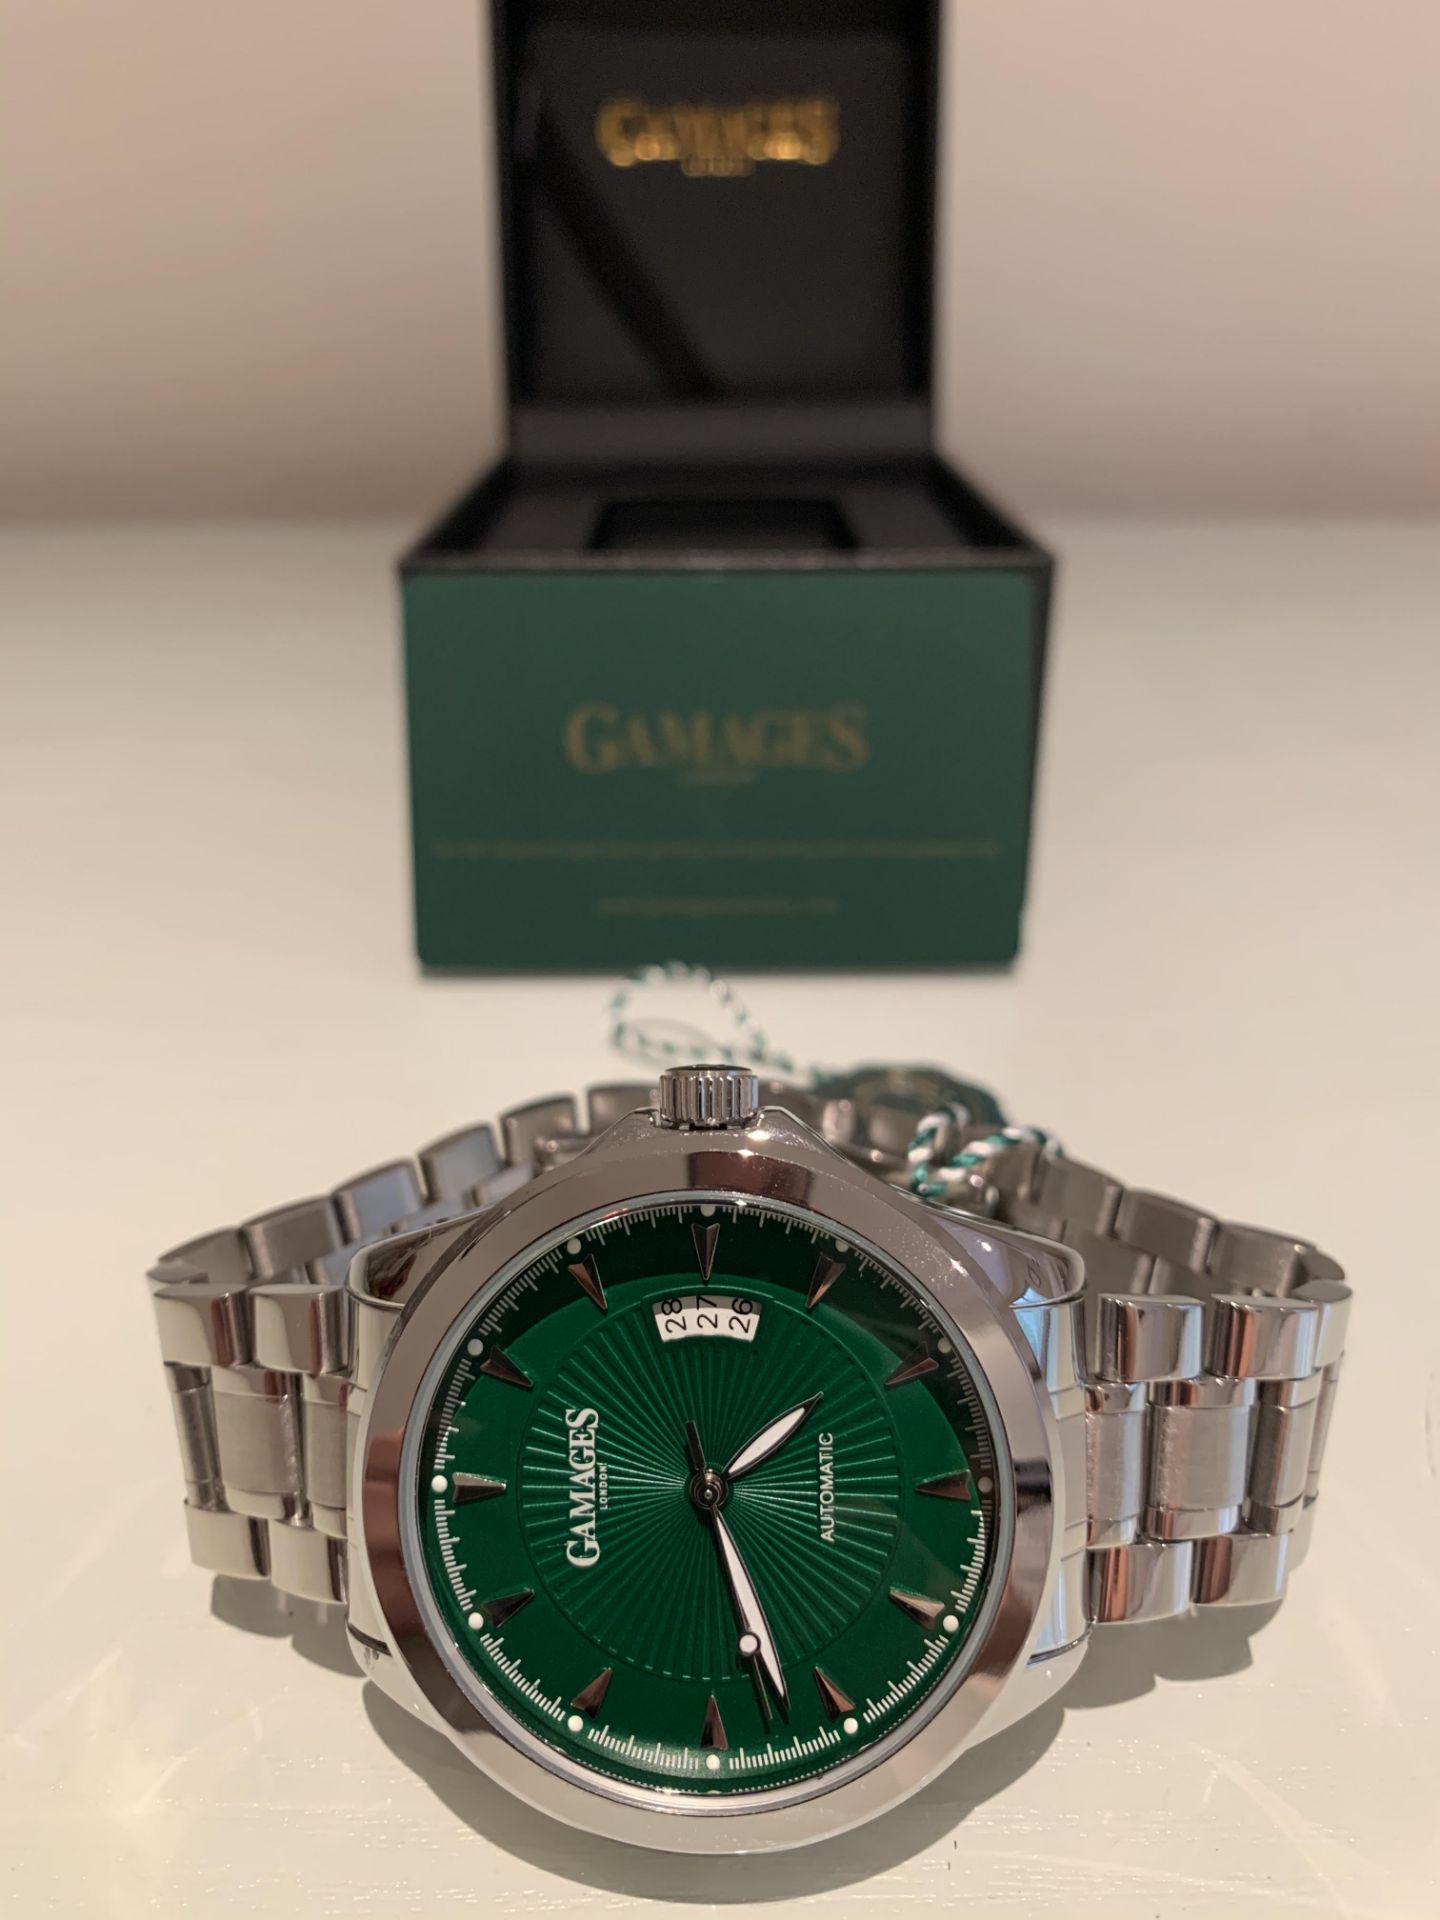 Limited Edition Hand Assembled GAMAGES Open Date Automatic Emerald – 5 Year Warranty & Free Delivery - Image 4 of 10